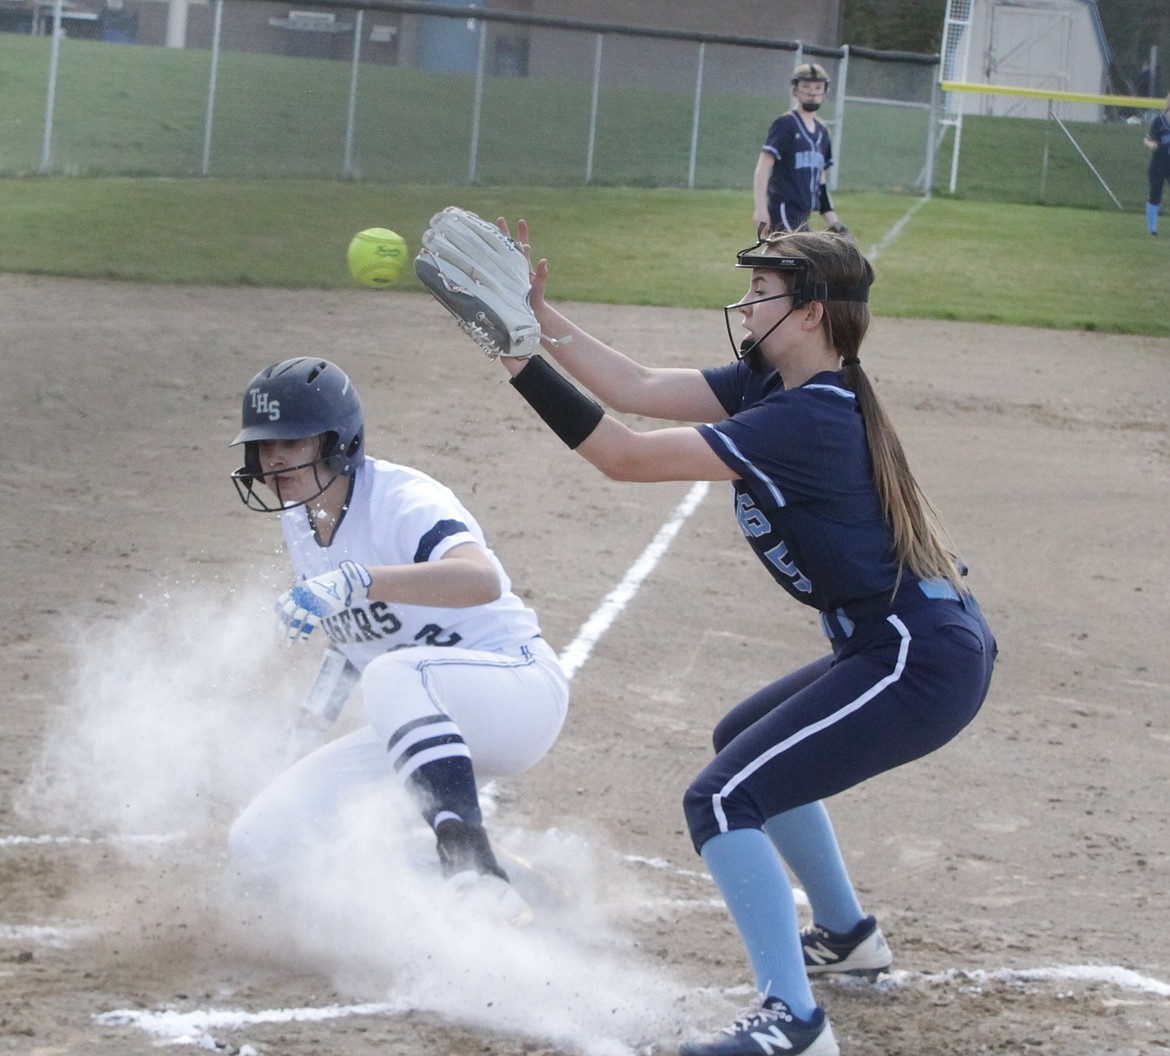 JASON ELLIOTT/Press
Timberlake junior Topanga Rojas slides into home safely after a wild pitch in the first inning of Wednesday's 3A District 1 softball opener against Bonners Ferry.